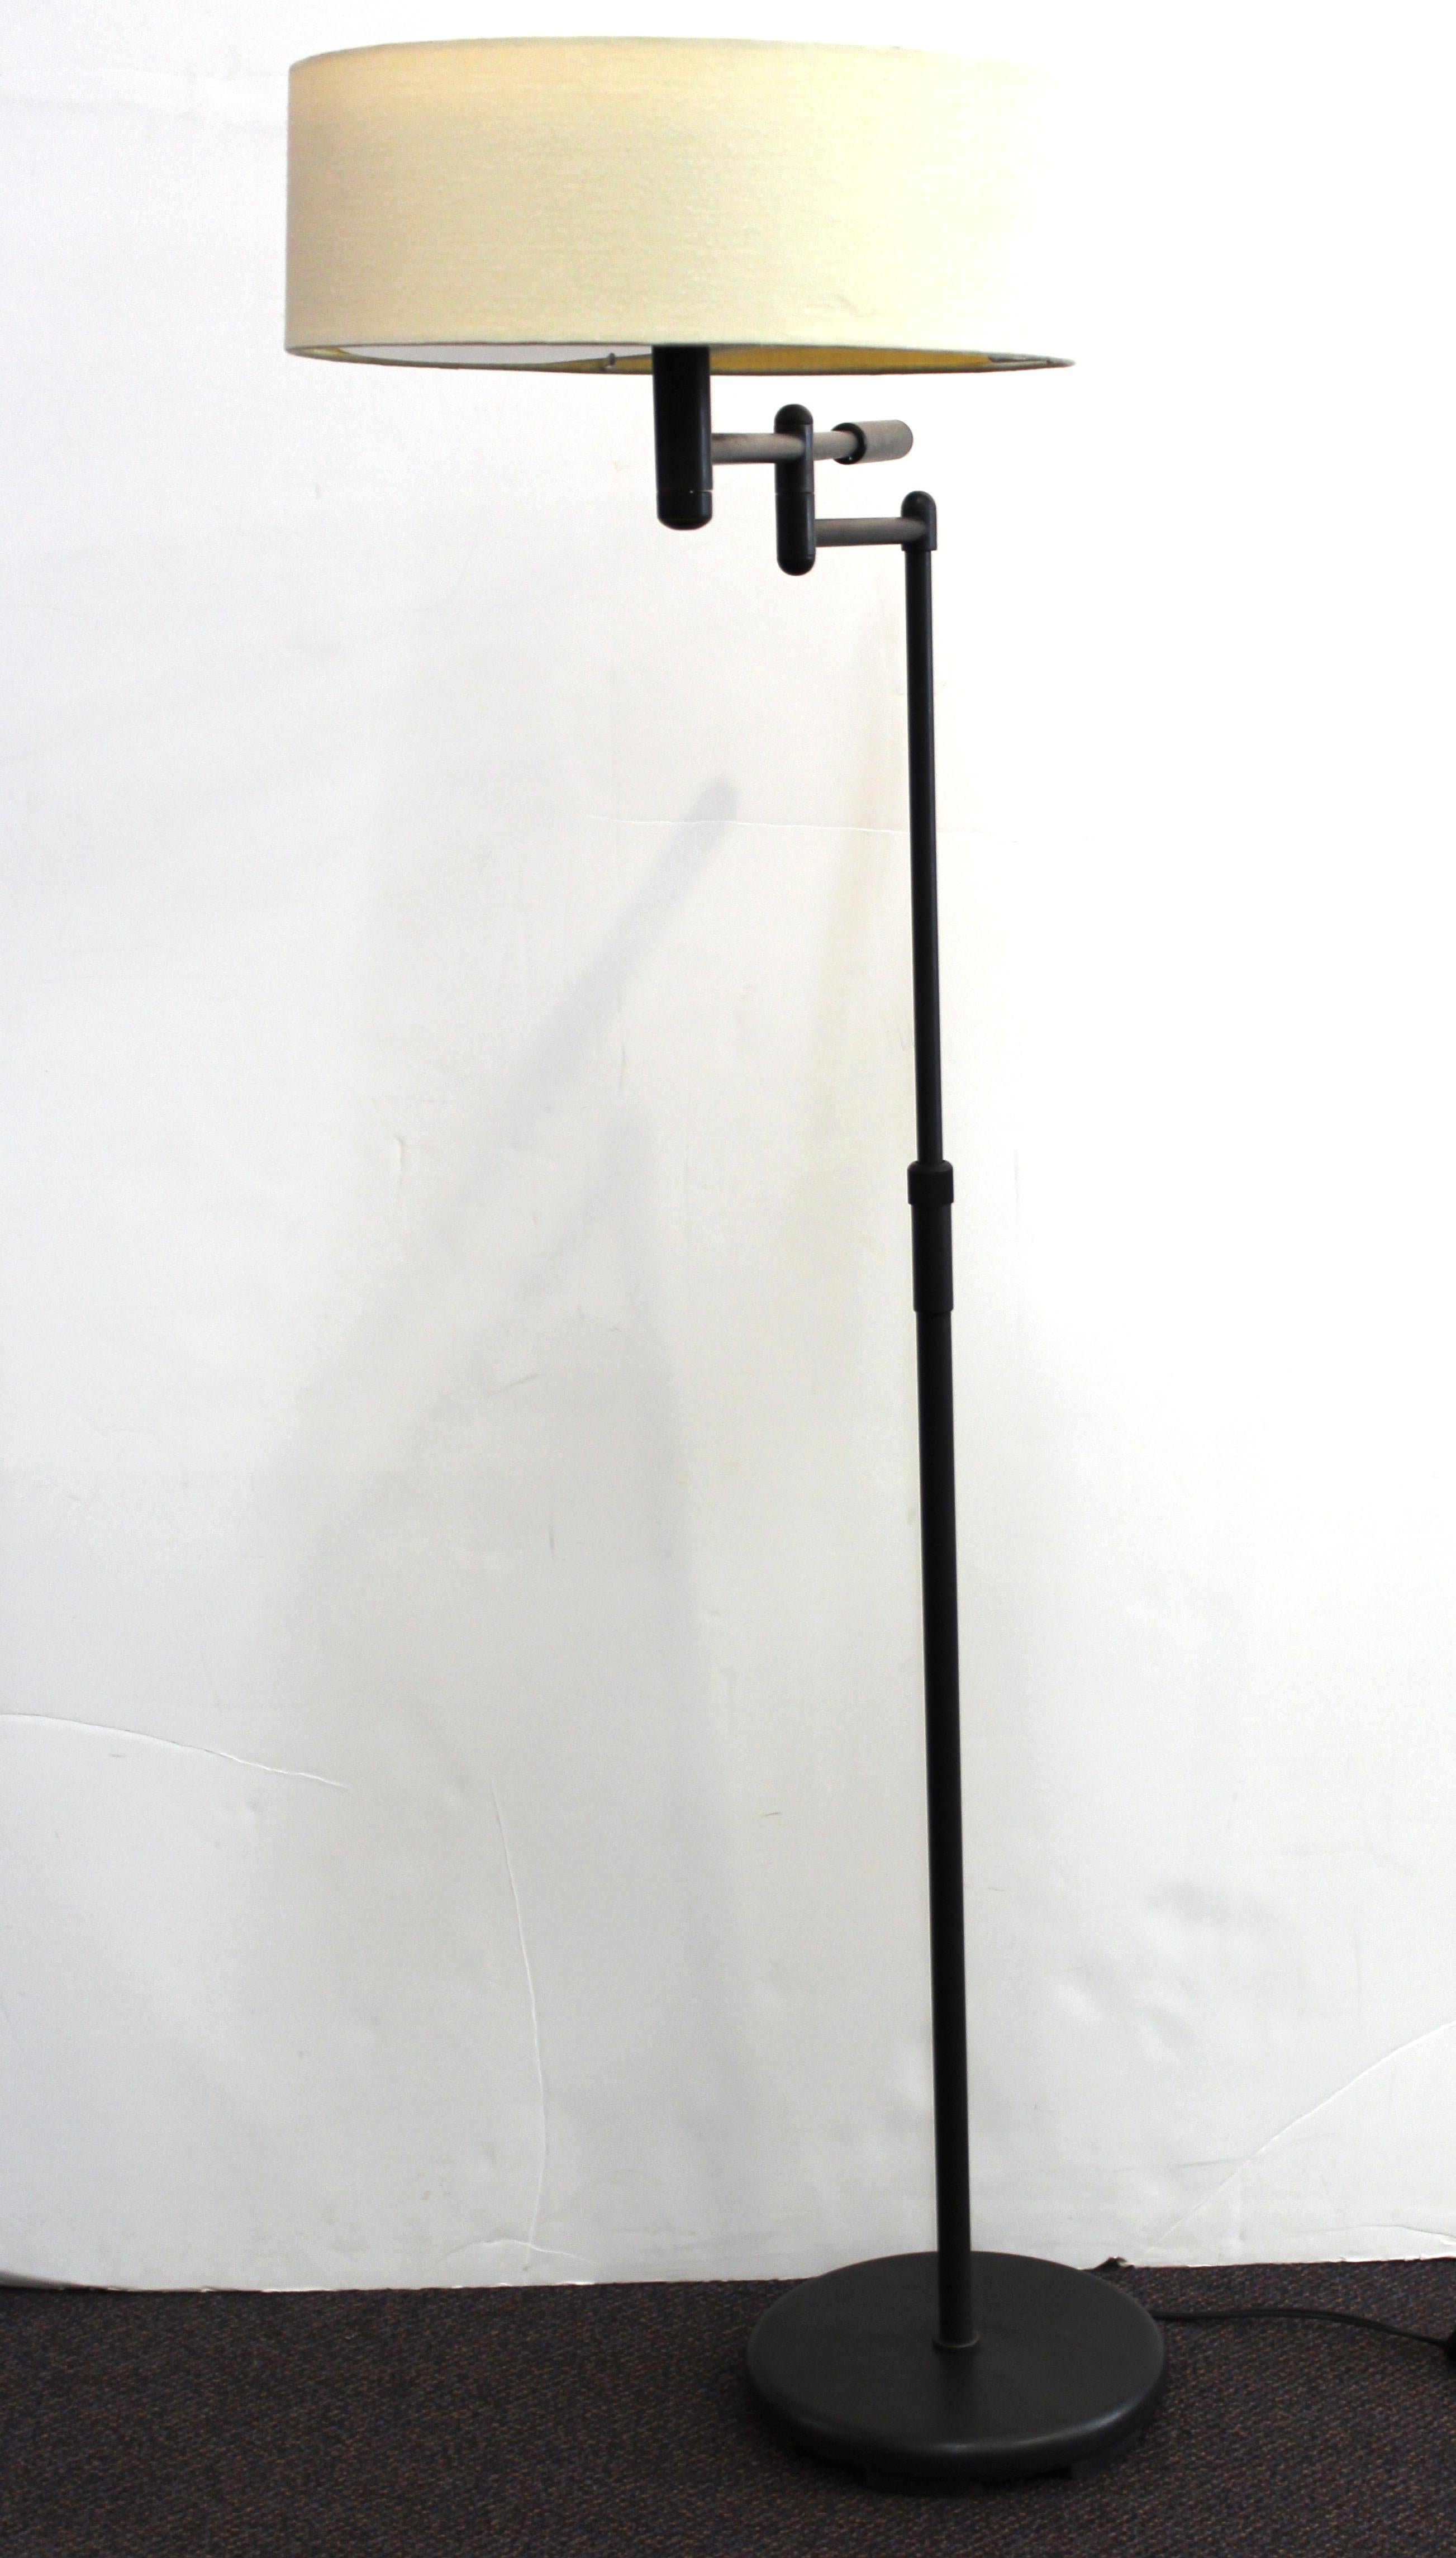 Modern metal floor lamp with articulated arm and original shade, with composite plastic mesh light filters. The piece was made in the mid-late 20th century and is in great vintage condition.